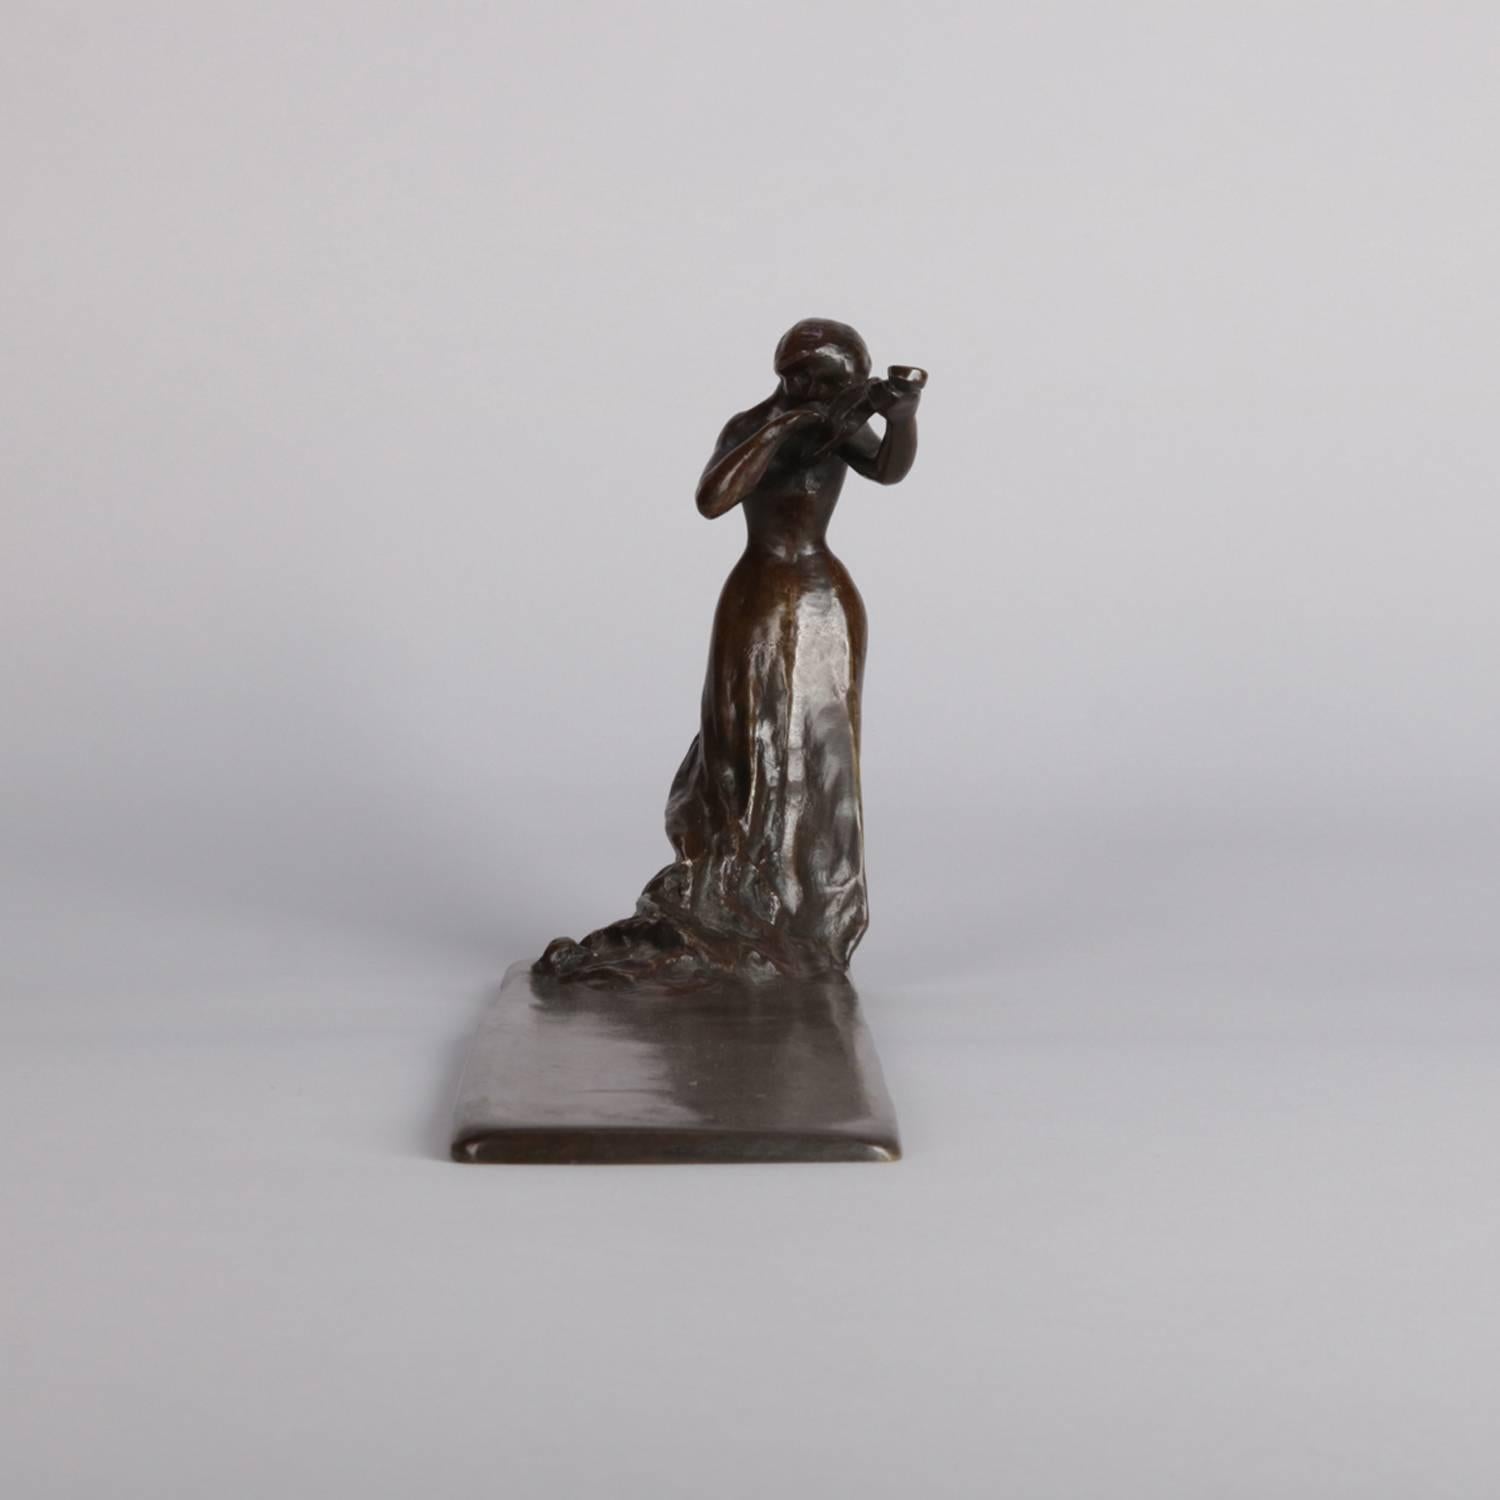 Art Deco figural bronze sculpture desk or dresser tray features full length portrait of female violinist in orchestra attire standing before extended tray, 20th century

Measures: 6.25